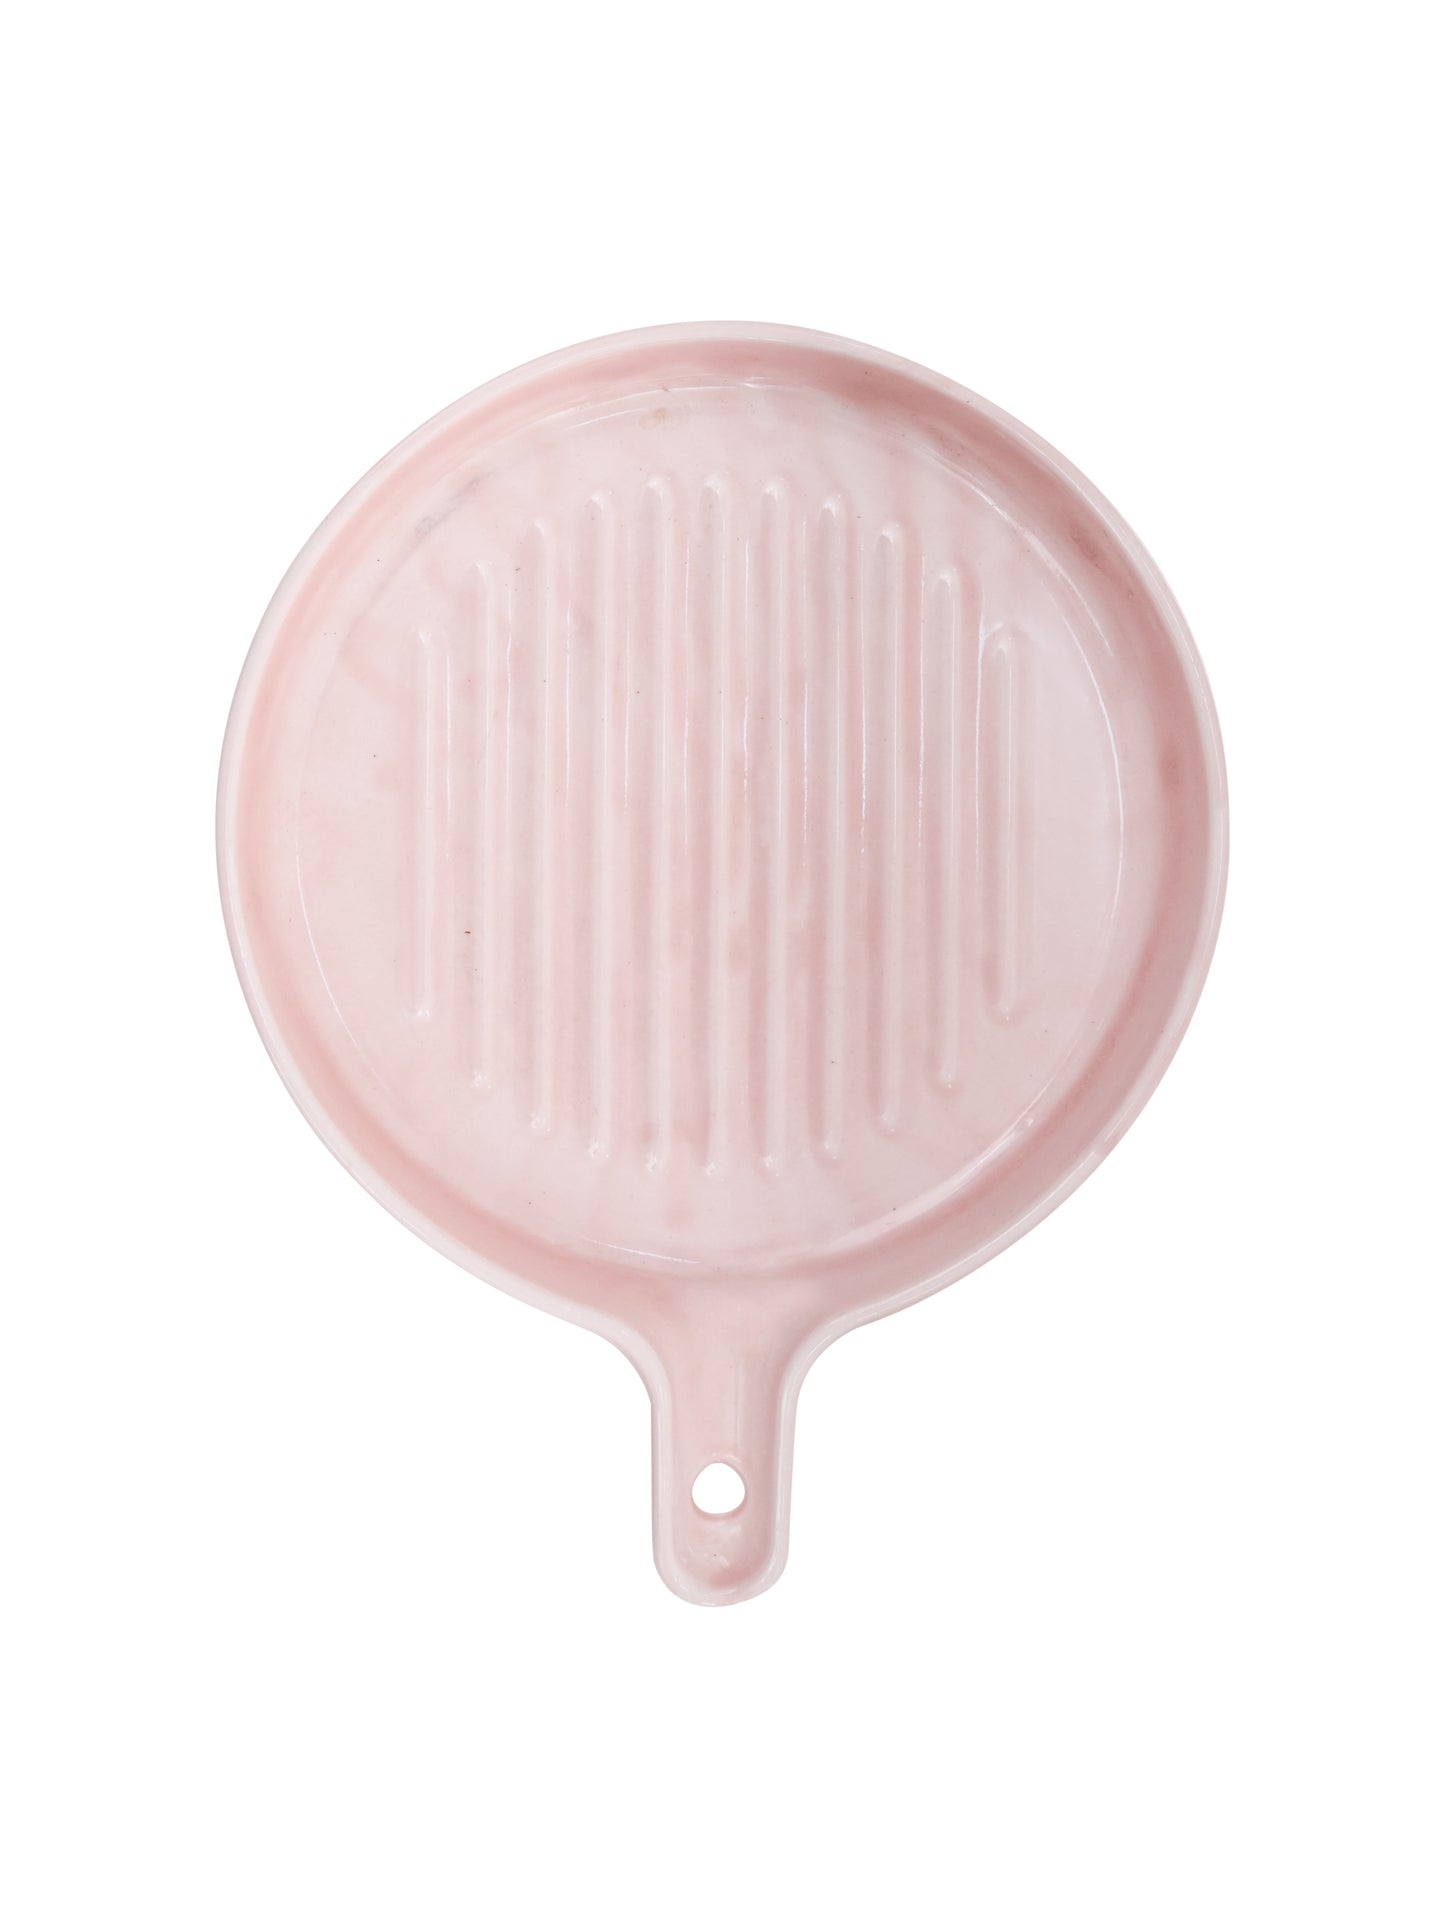 Ceramic Round Grill Plates for Serving, Pink